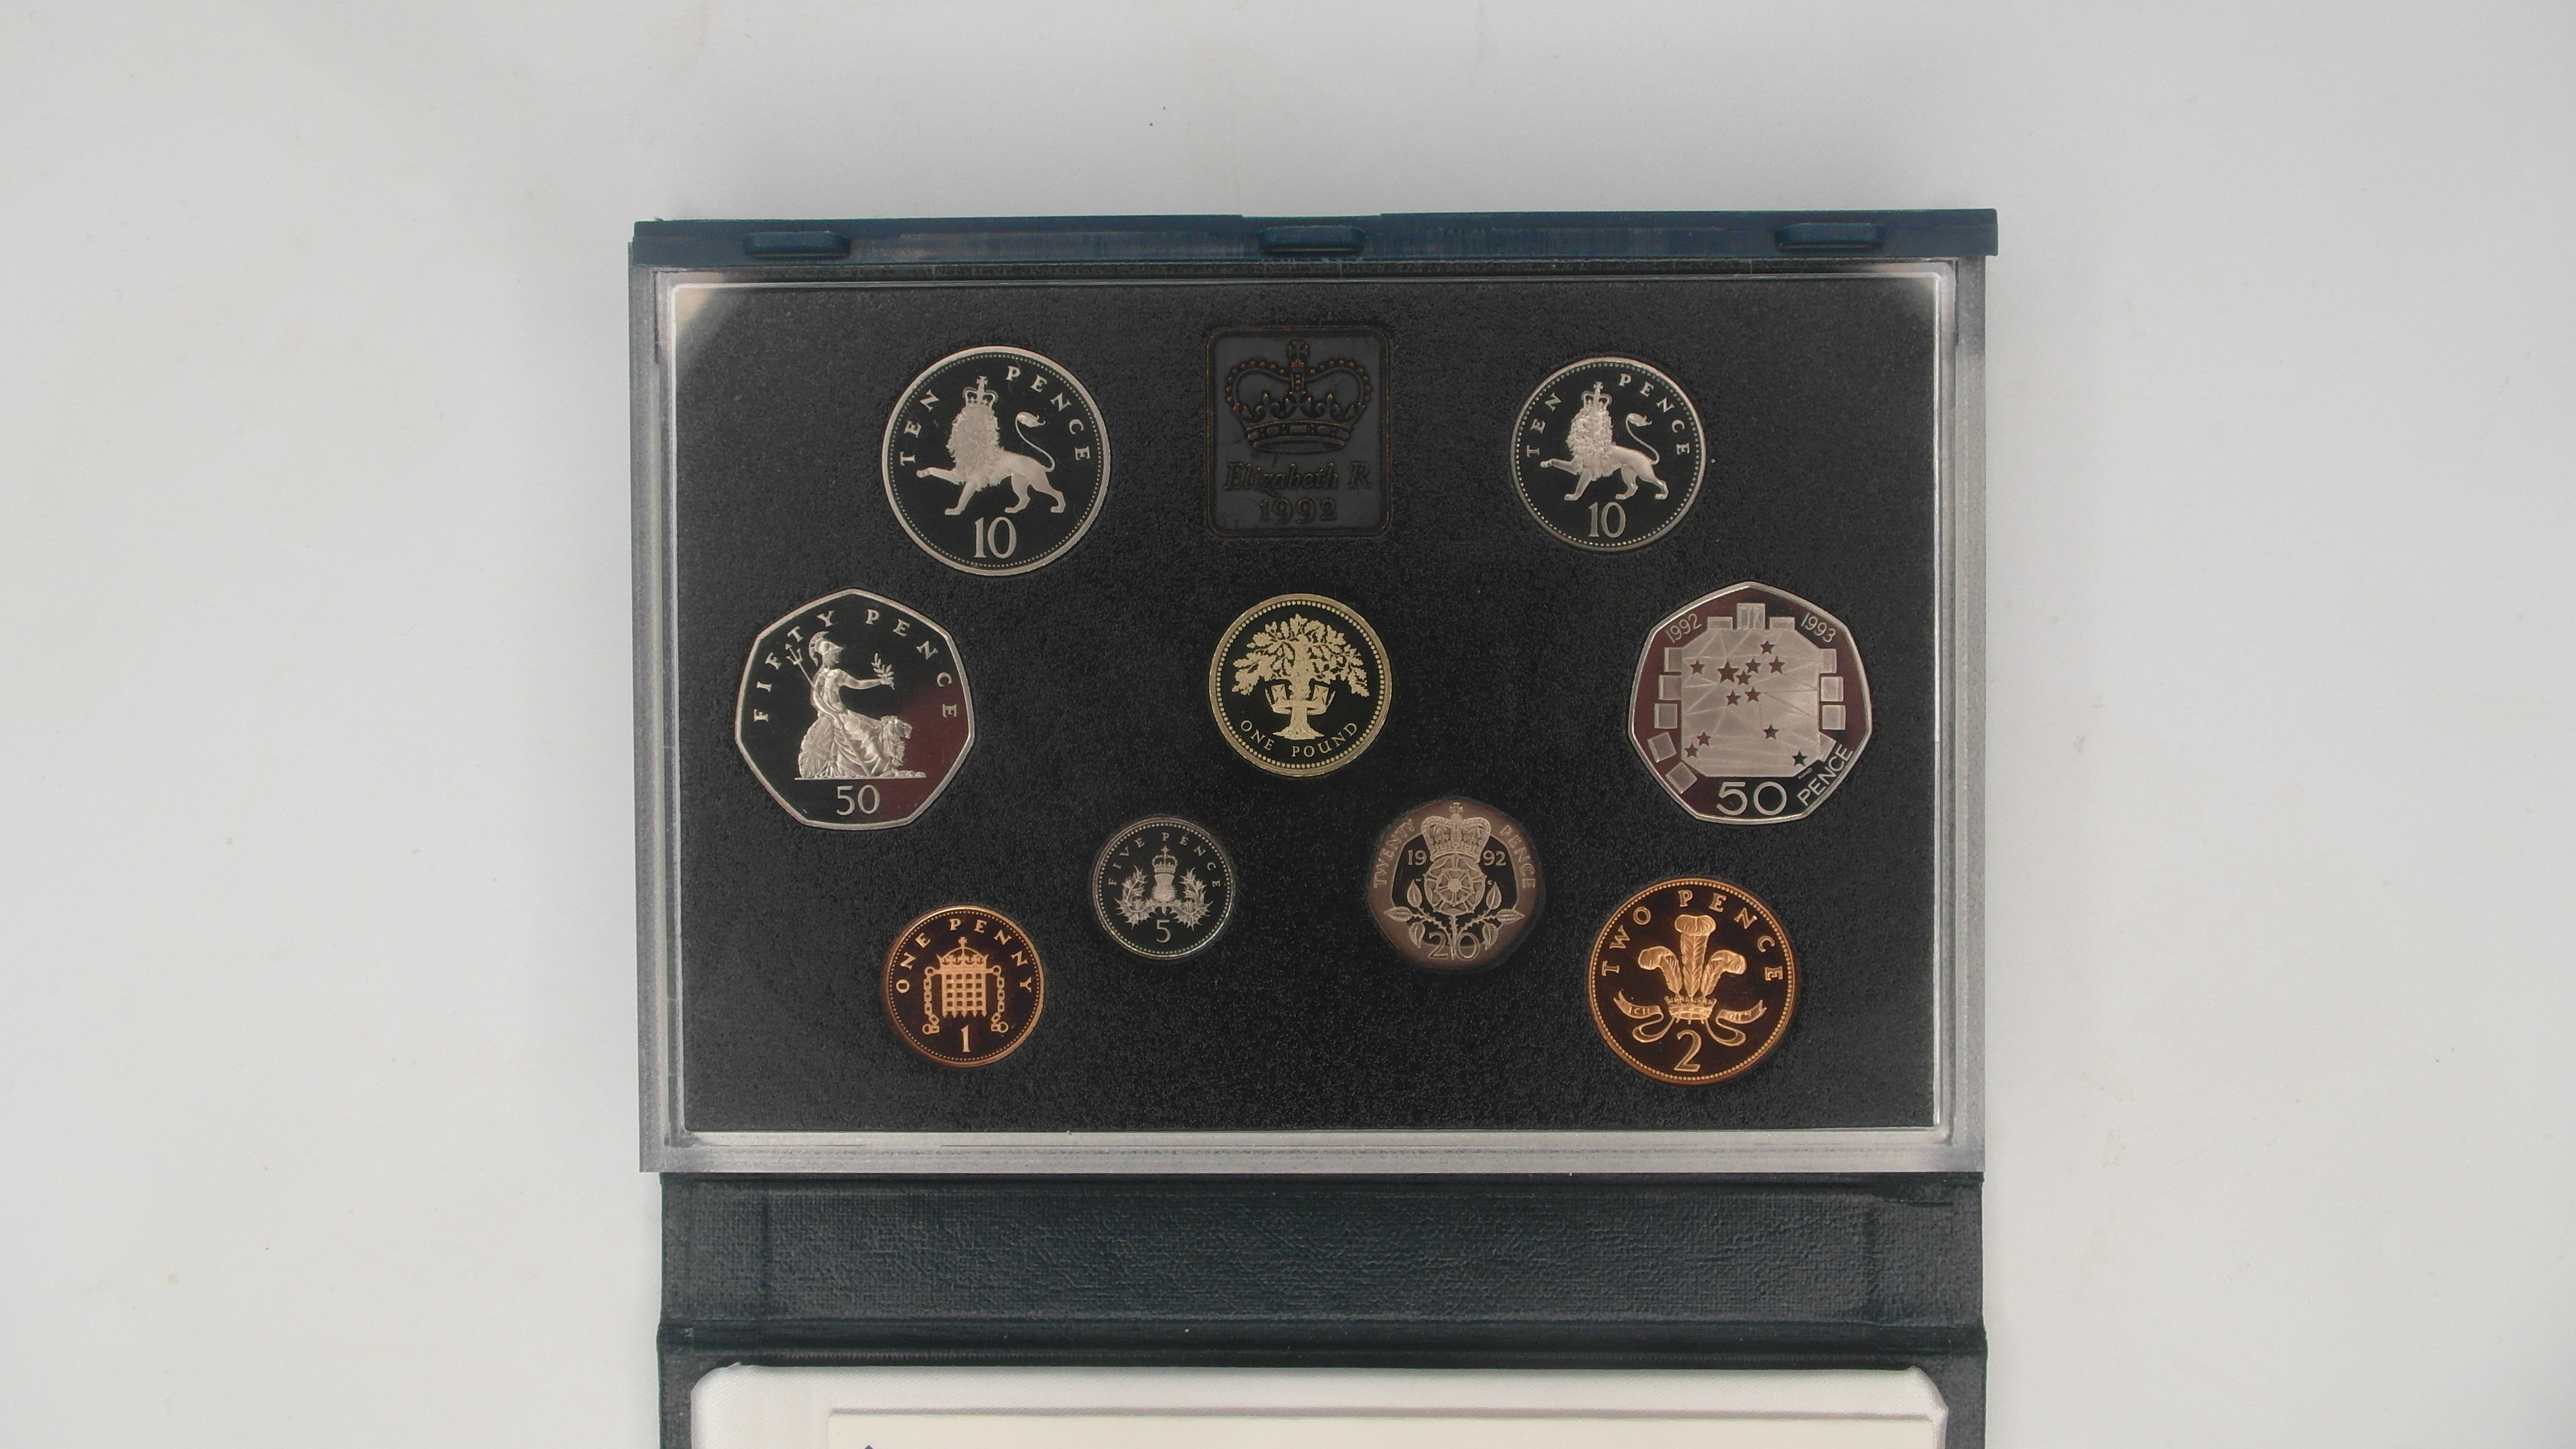 1992 RARE ROYAL MINT UNITED KINGDOM DELUXE PROOF COIN COLLECTION - Image 3 of 6